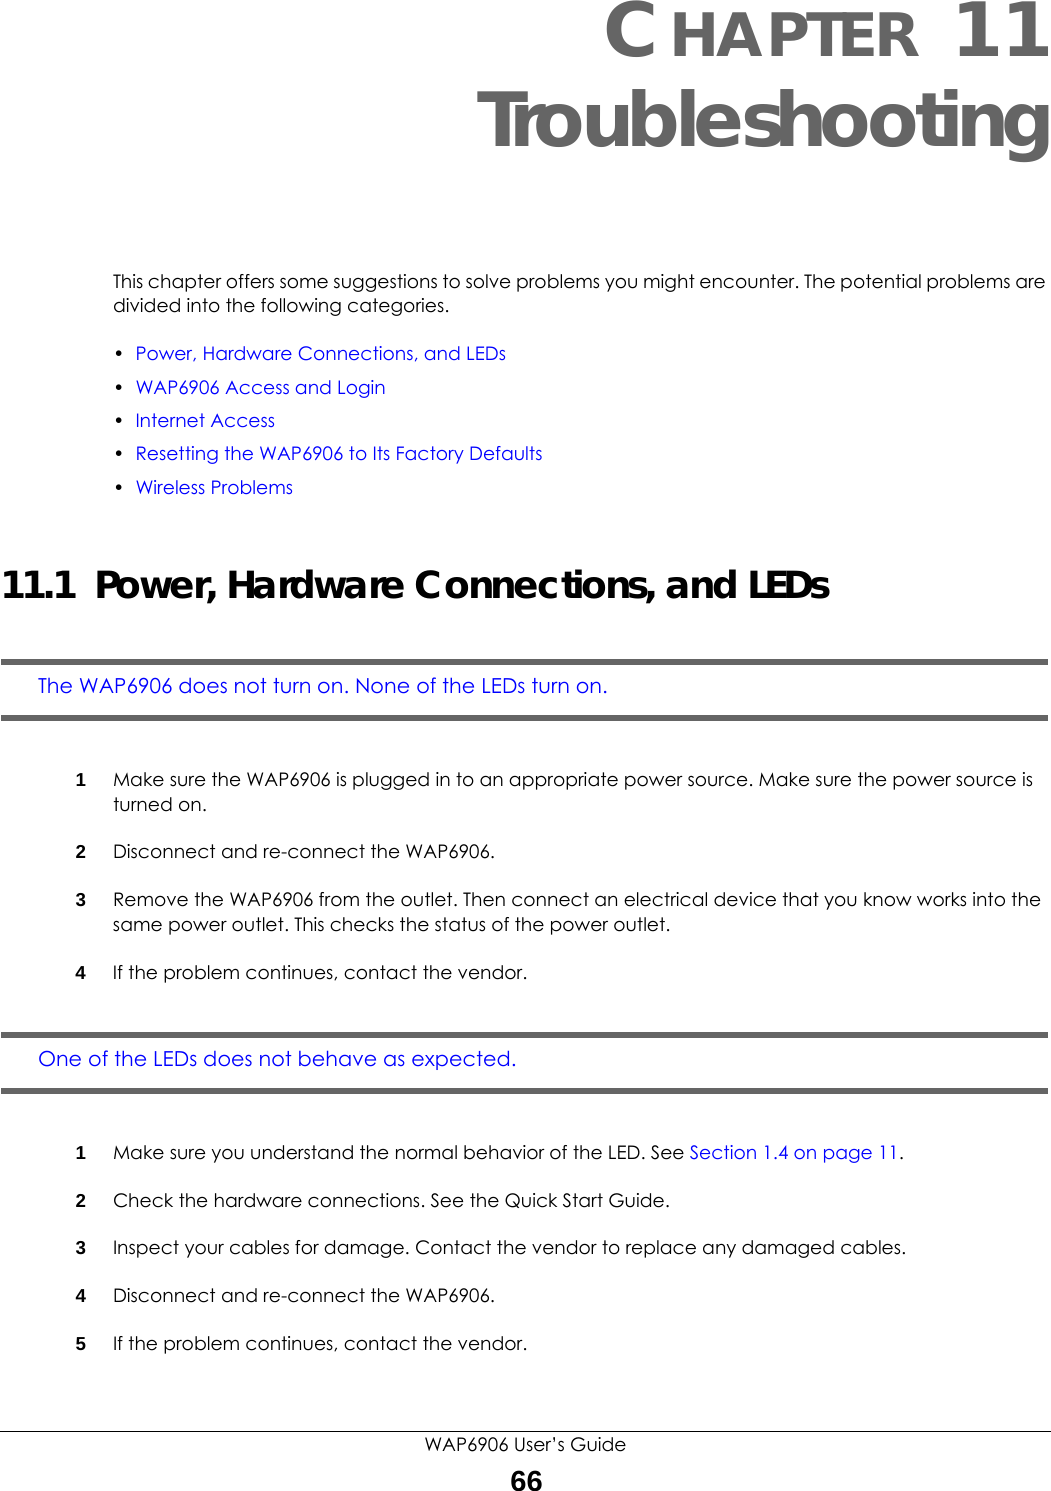 WAP6906 User’s Guide66CHAPTER 11TroubleshootingThis chapter offers some suggestions to solve problems you might encounter. The potential problems are divided into the following categories. •Power, Hardware Connections, and LEDs•WAP6906 Access and Login•Internet Access•Resetting the WAP6906 to Its Factory Defaults•Wireless Problems11.1  Power, Hardware Connections, and LEDsThe WAP6906 does not turn on. None of the LEDs turn on.1Make sure the WAP6906 is plugged in to an appropriate power source. Make sure the power source is turned on.2Disconnect and re-connect the WAP6906.3Remove the WAP6906 from the outlet. Then connect an electrical device that you know works into the same power outlet. This checks the status of the power outlet.4If the problem continues, contact the vendor.One of the LEDs does not behave as expected.1Make sure you understand the normal behavior of the LED. See Section 1.4 on page 11.2Check the hardware connections. See the Quick Start Guide. 3Inspect your cables for damage. Contact the vendor to replace any damaged cables.4Disconnect and re-connect the WAP6906. 5If the problem continues, contact the vendor.